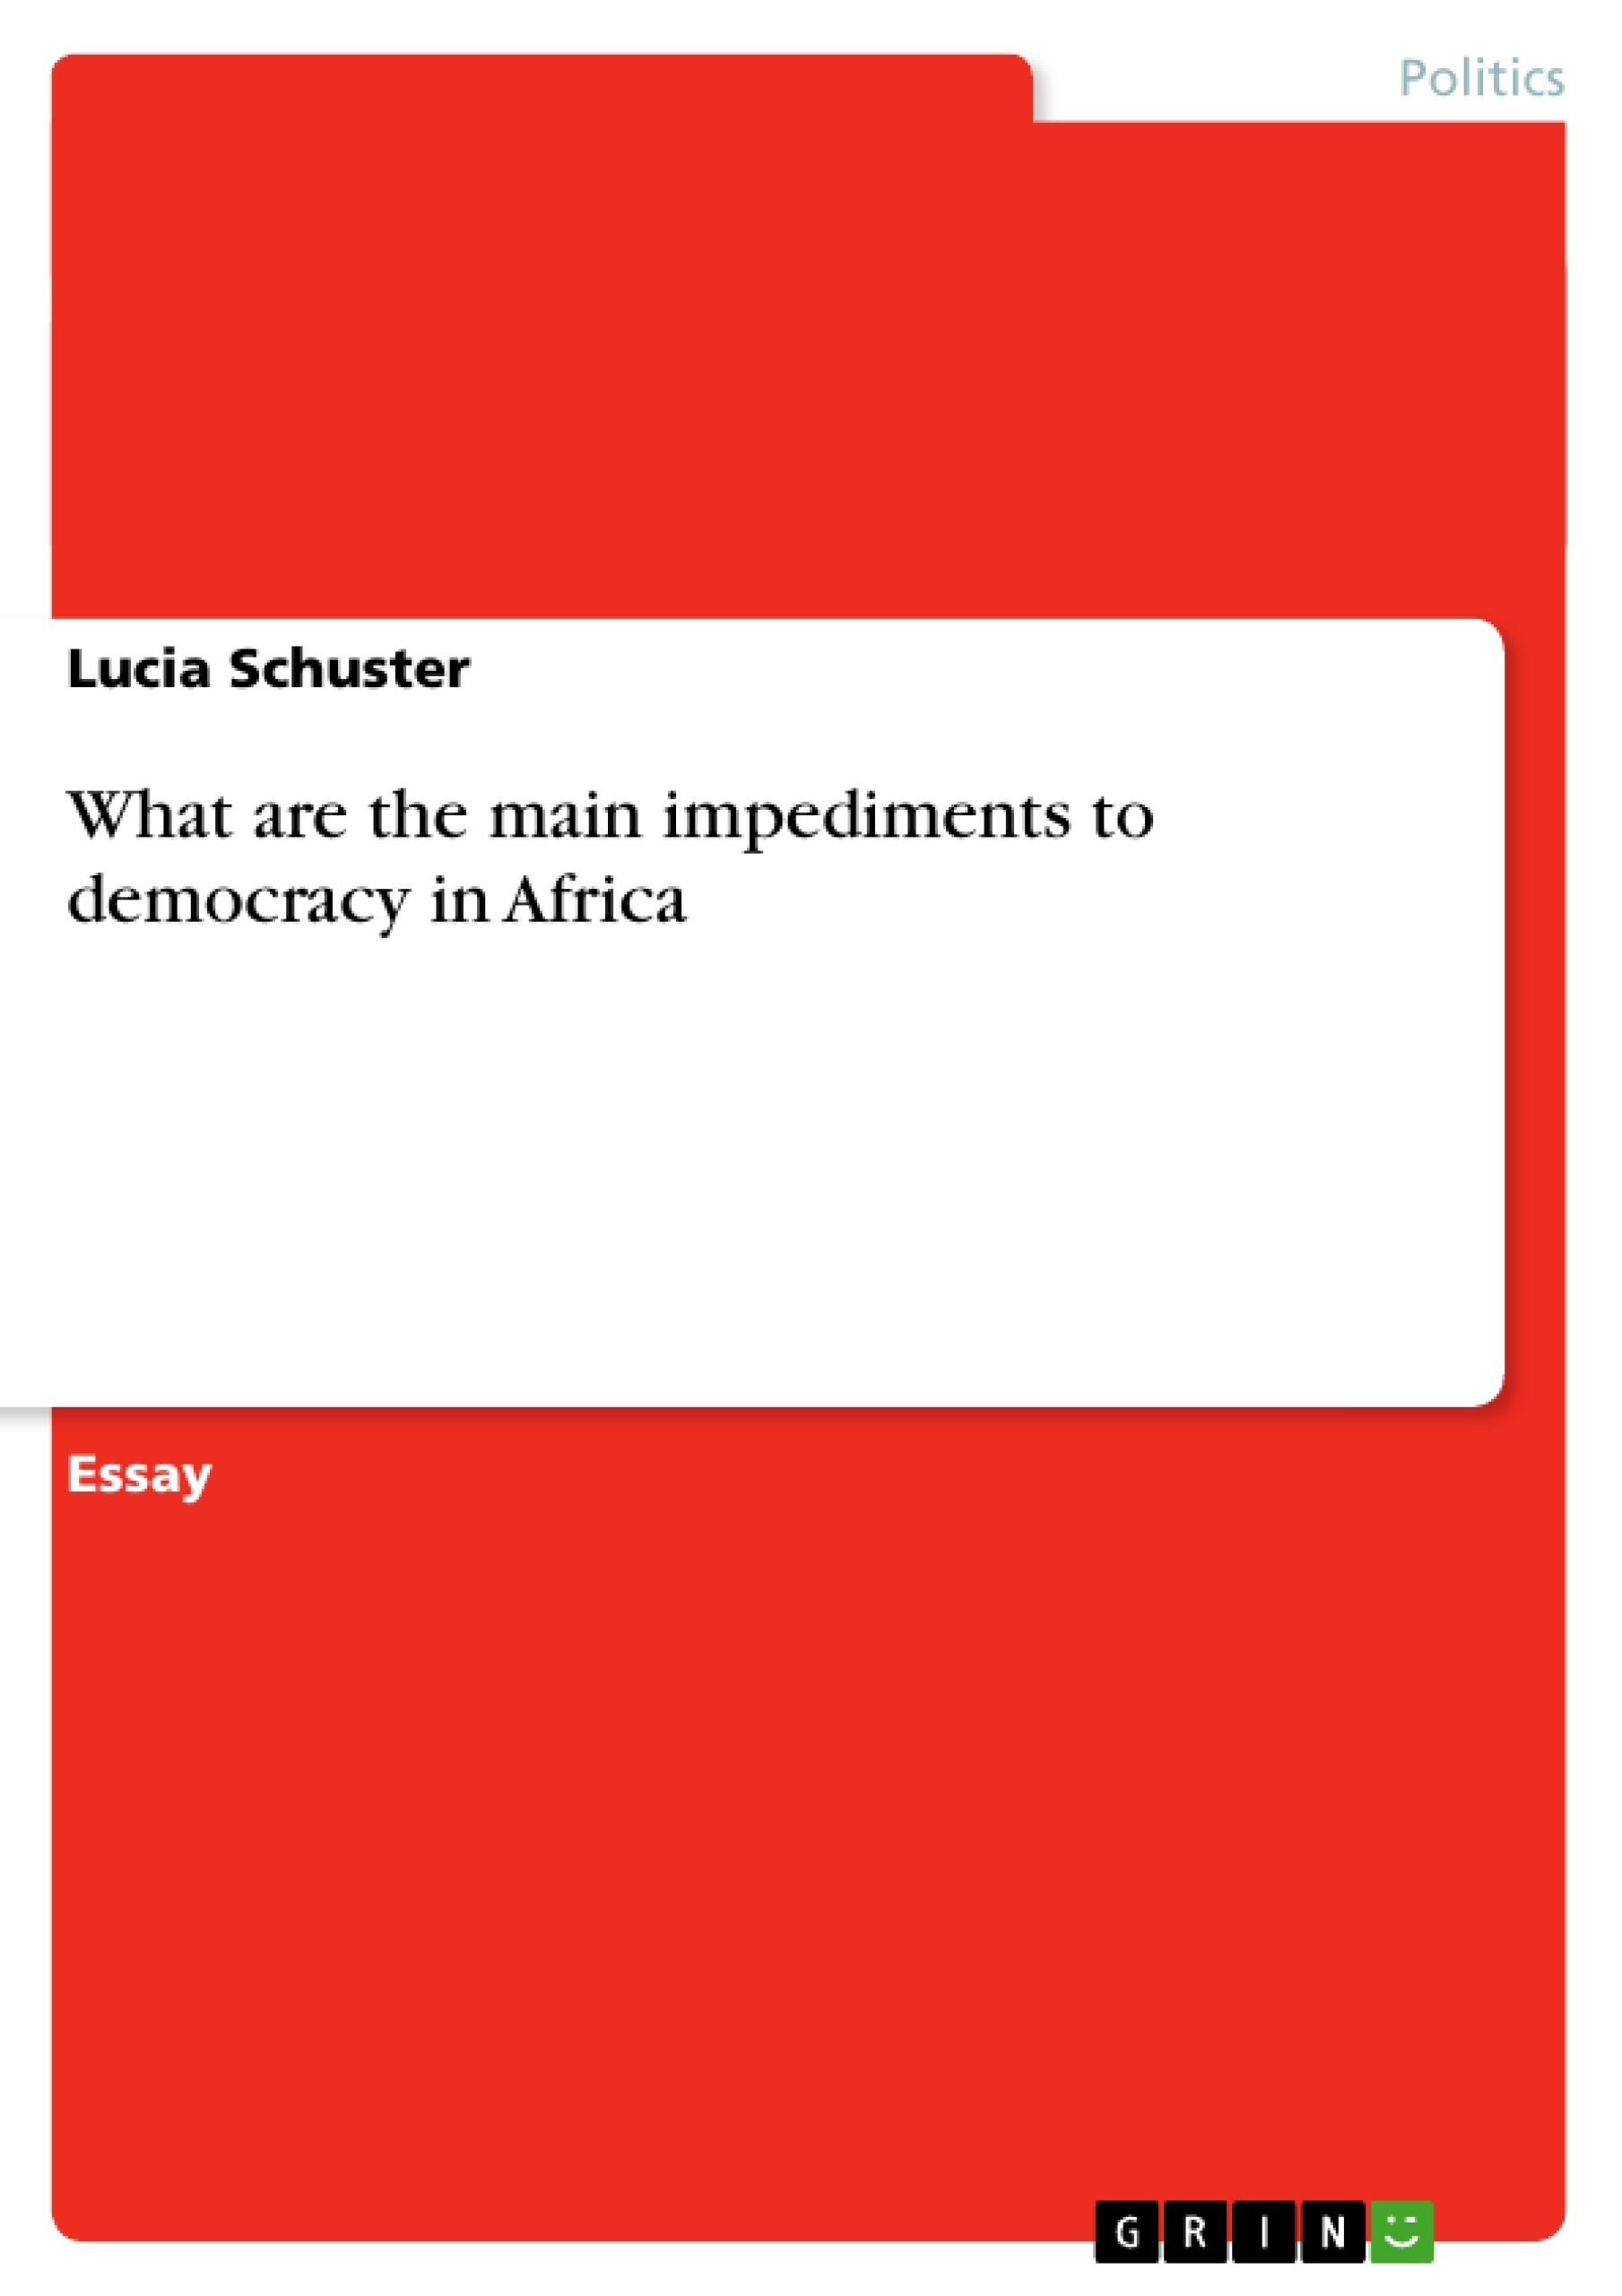 Title: What are the main impediments to democracy in Africa